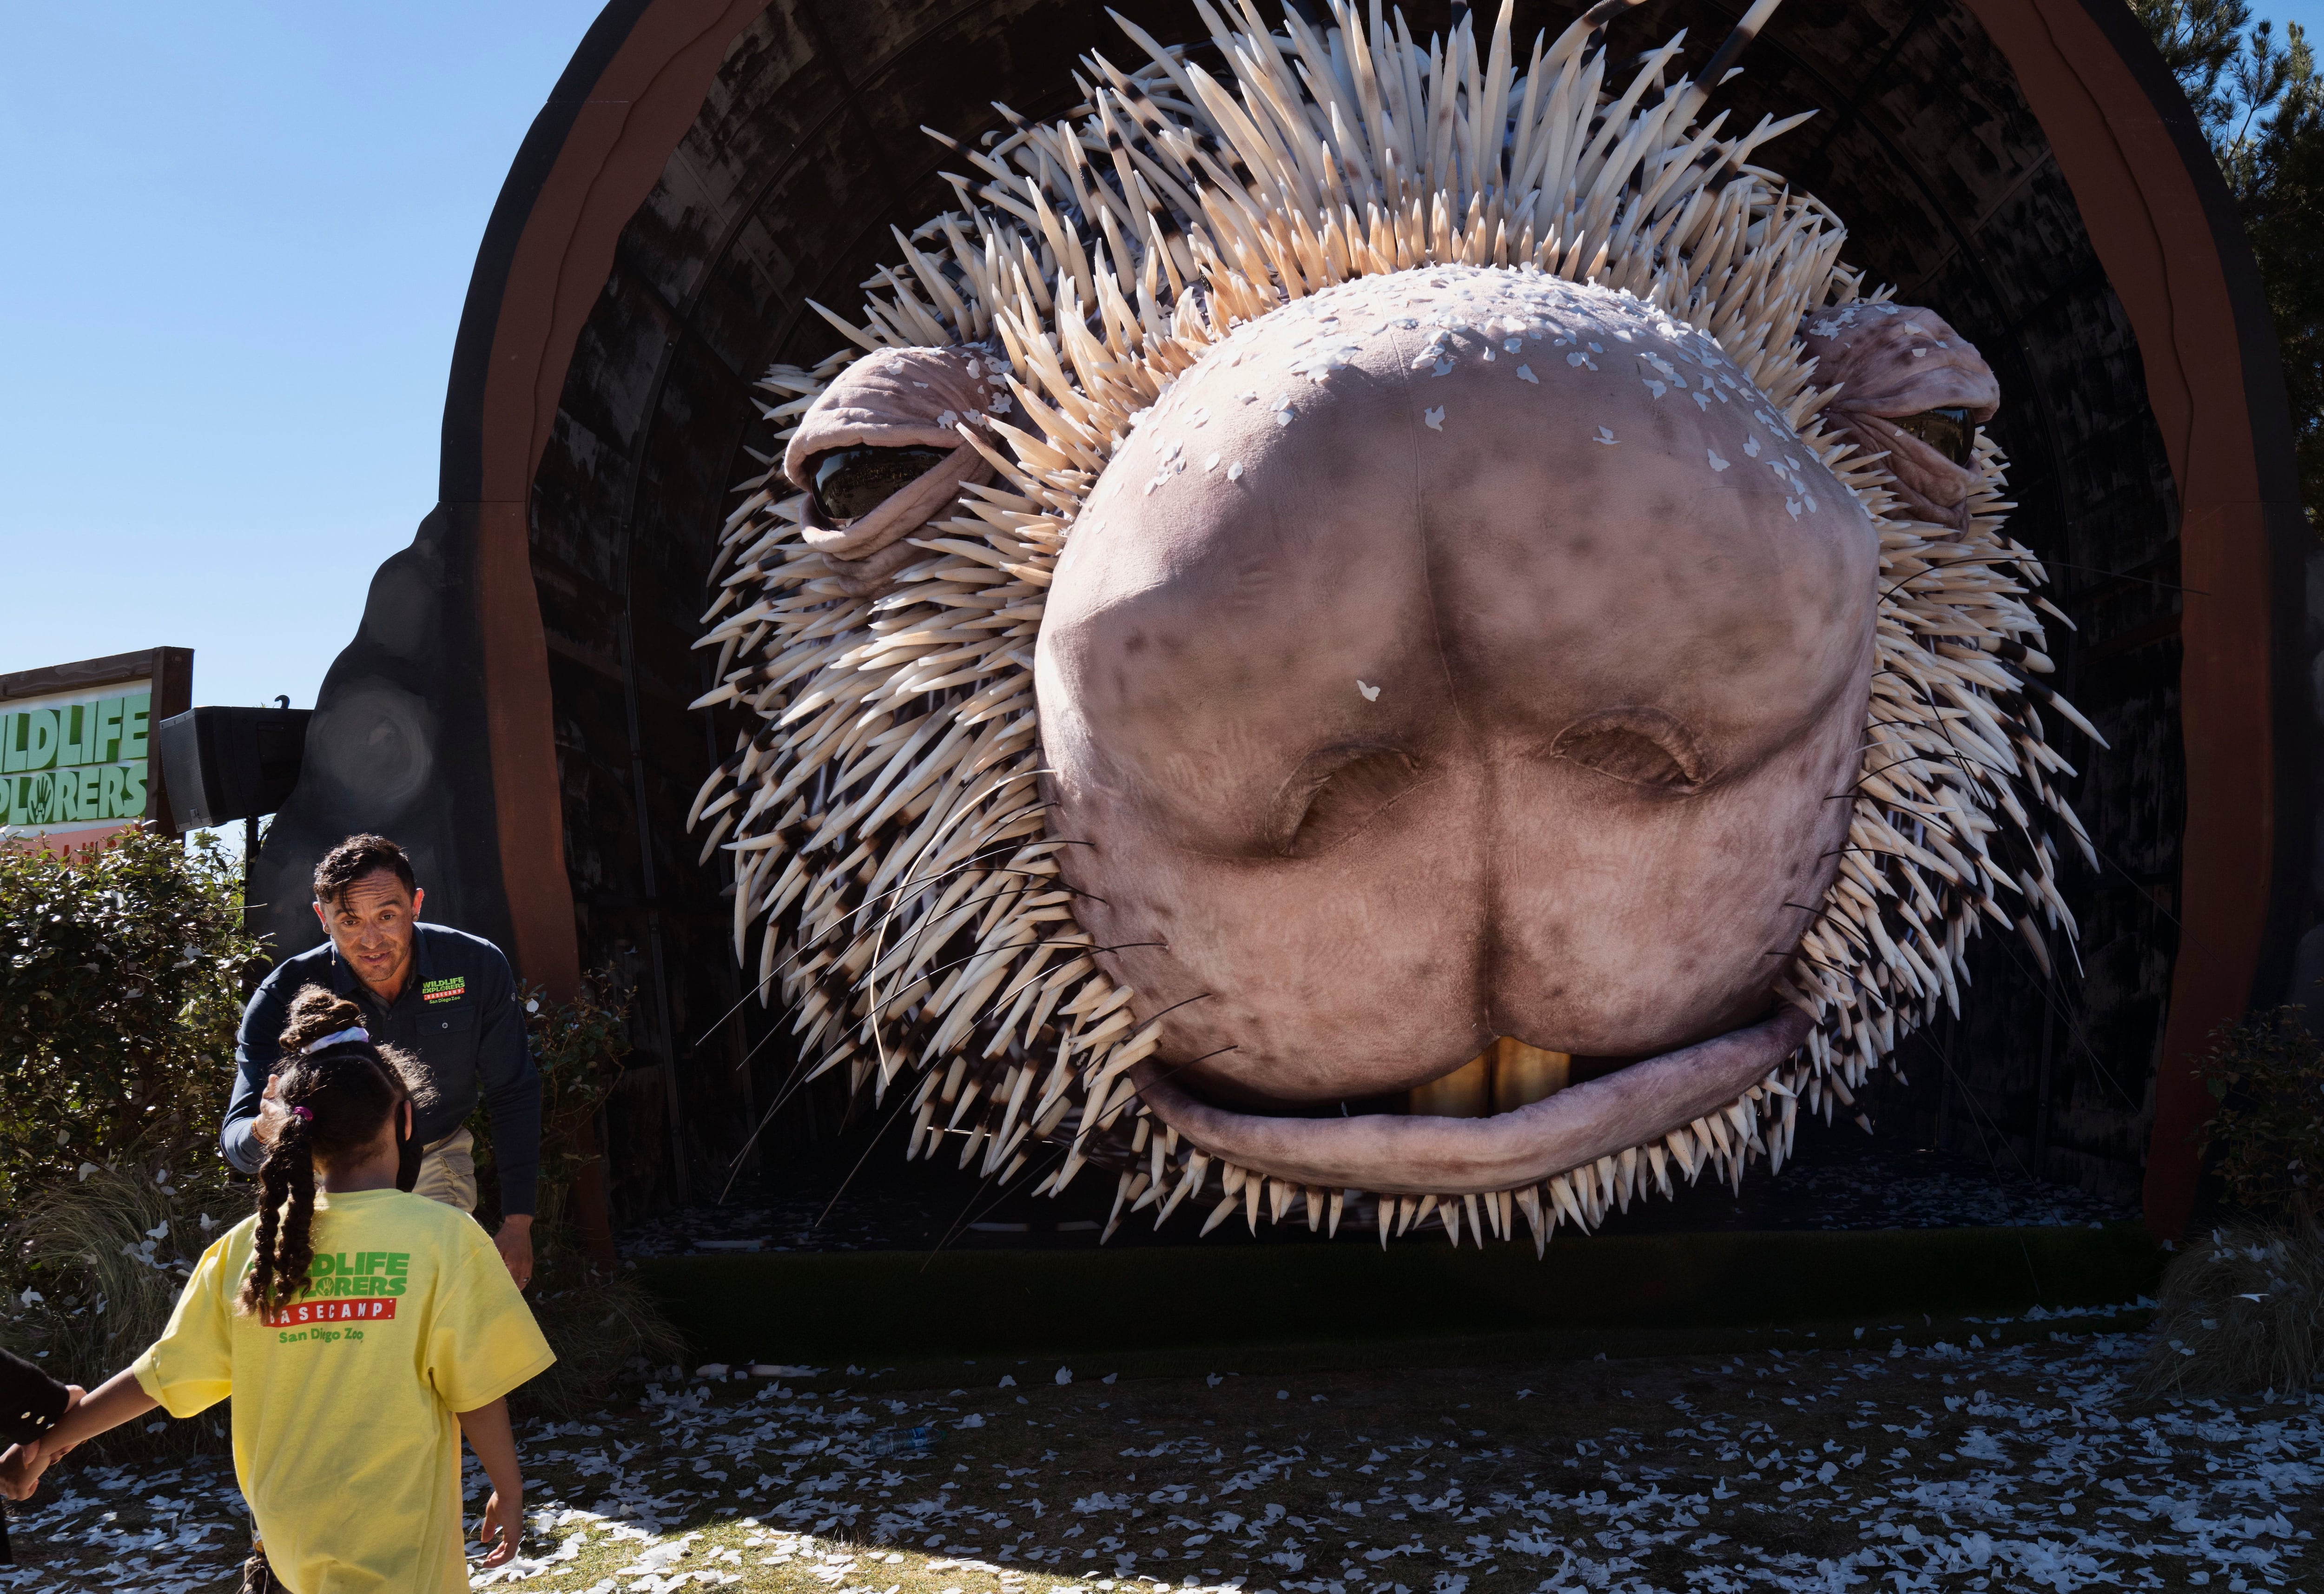 Quills and thrills as prodigious porcupine puppet unveiled